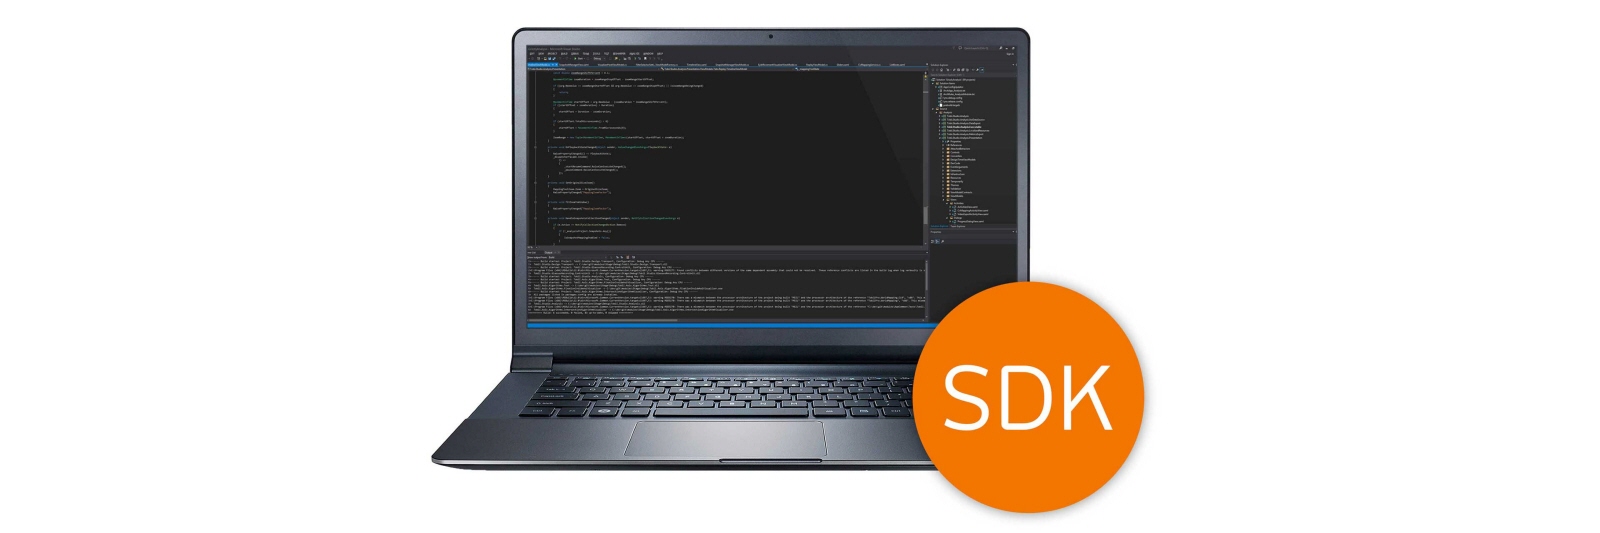 A laptop with SDK software.